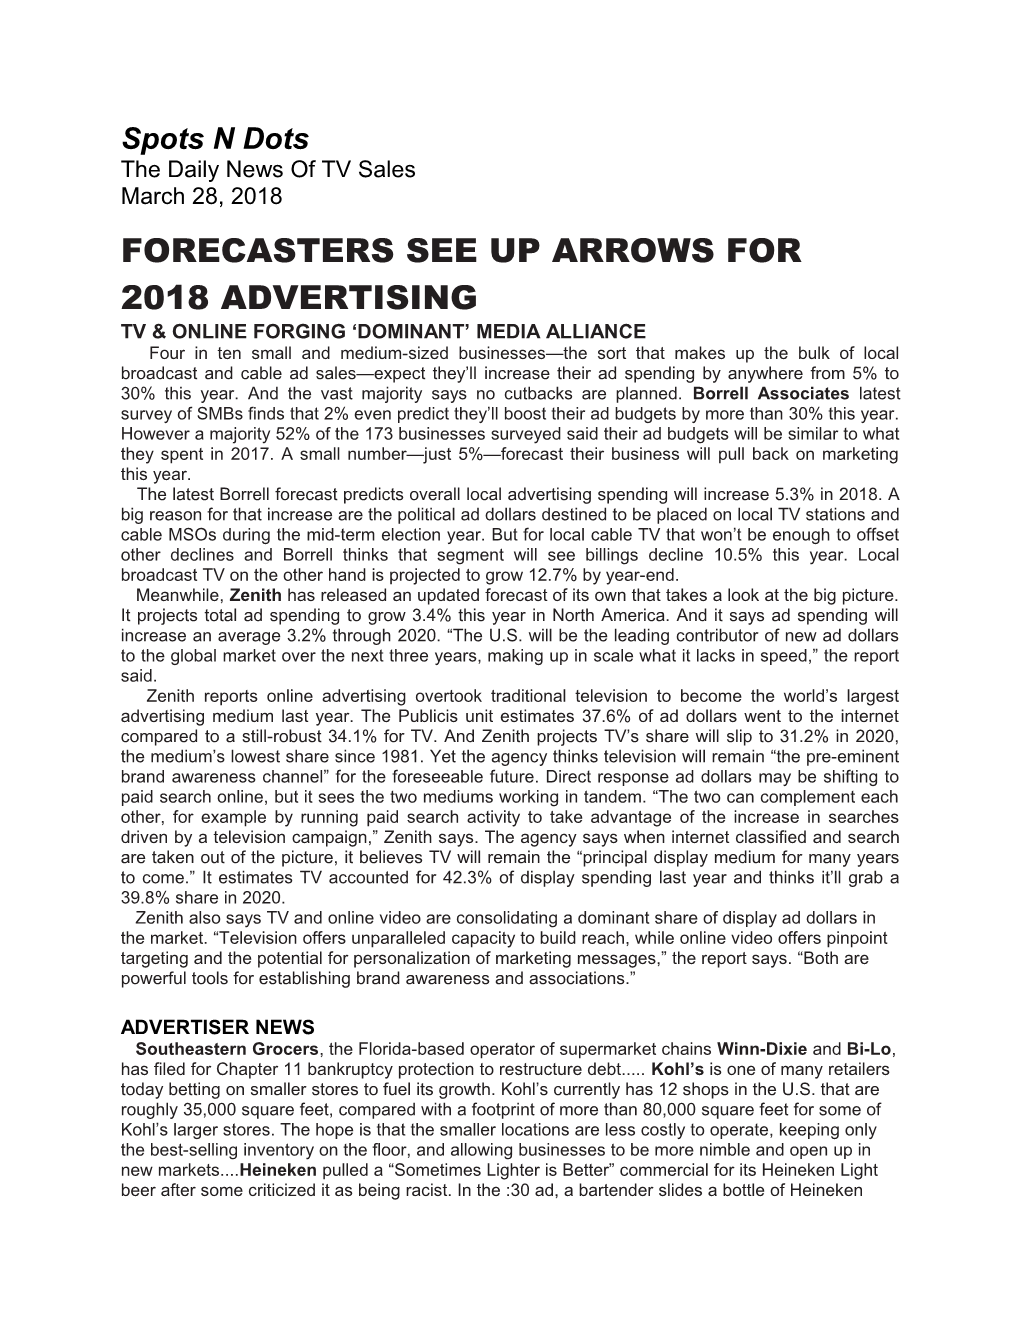 Forecasters See up Arrows for 2018 Advertising